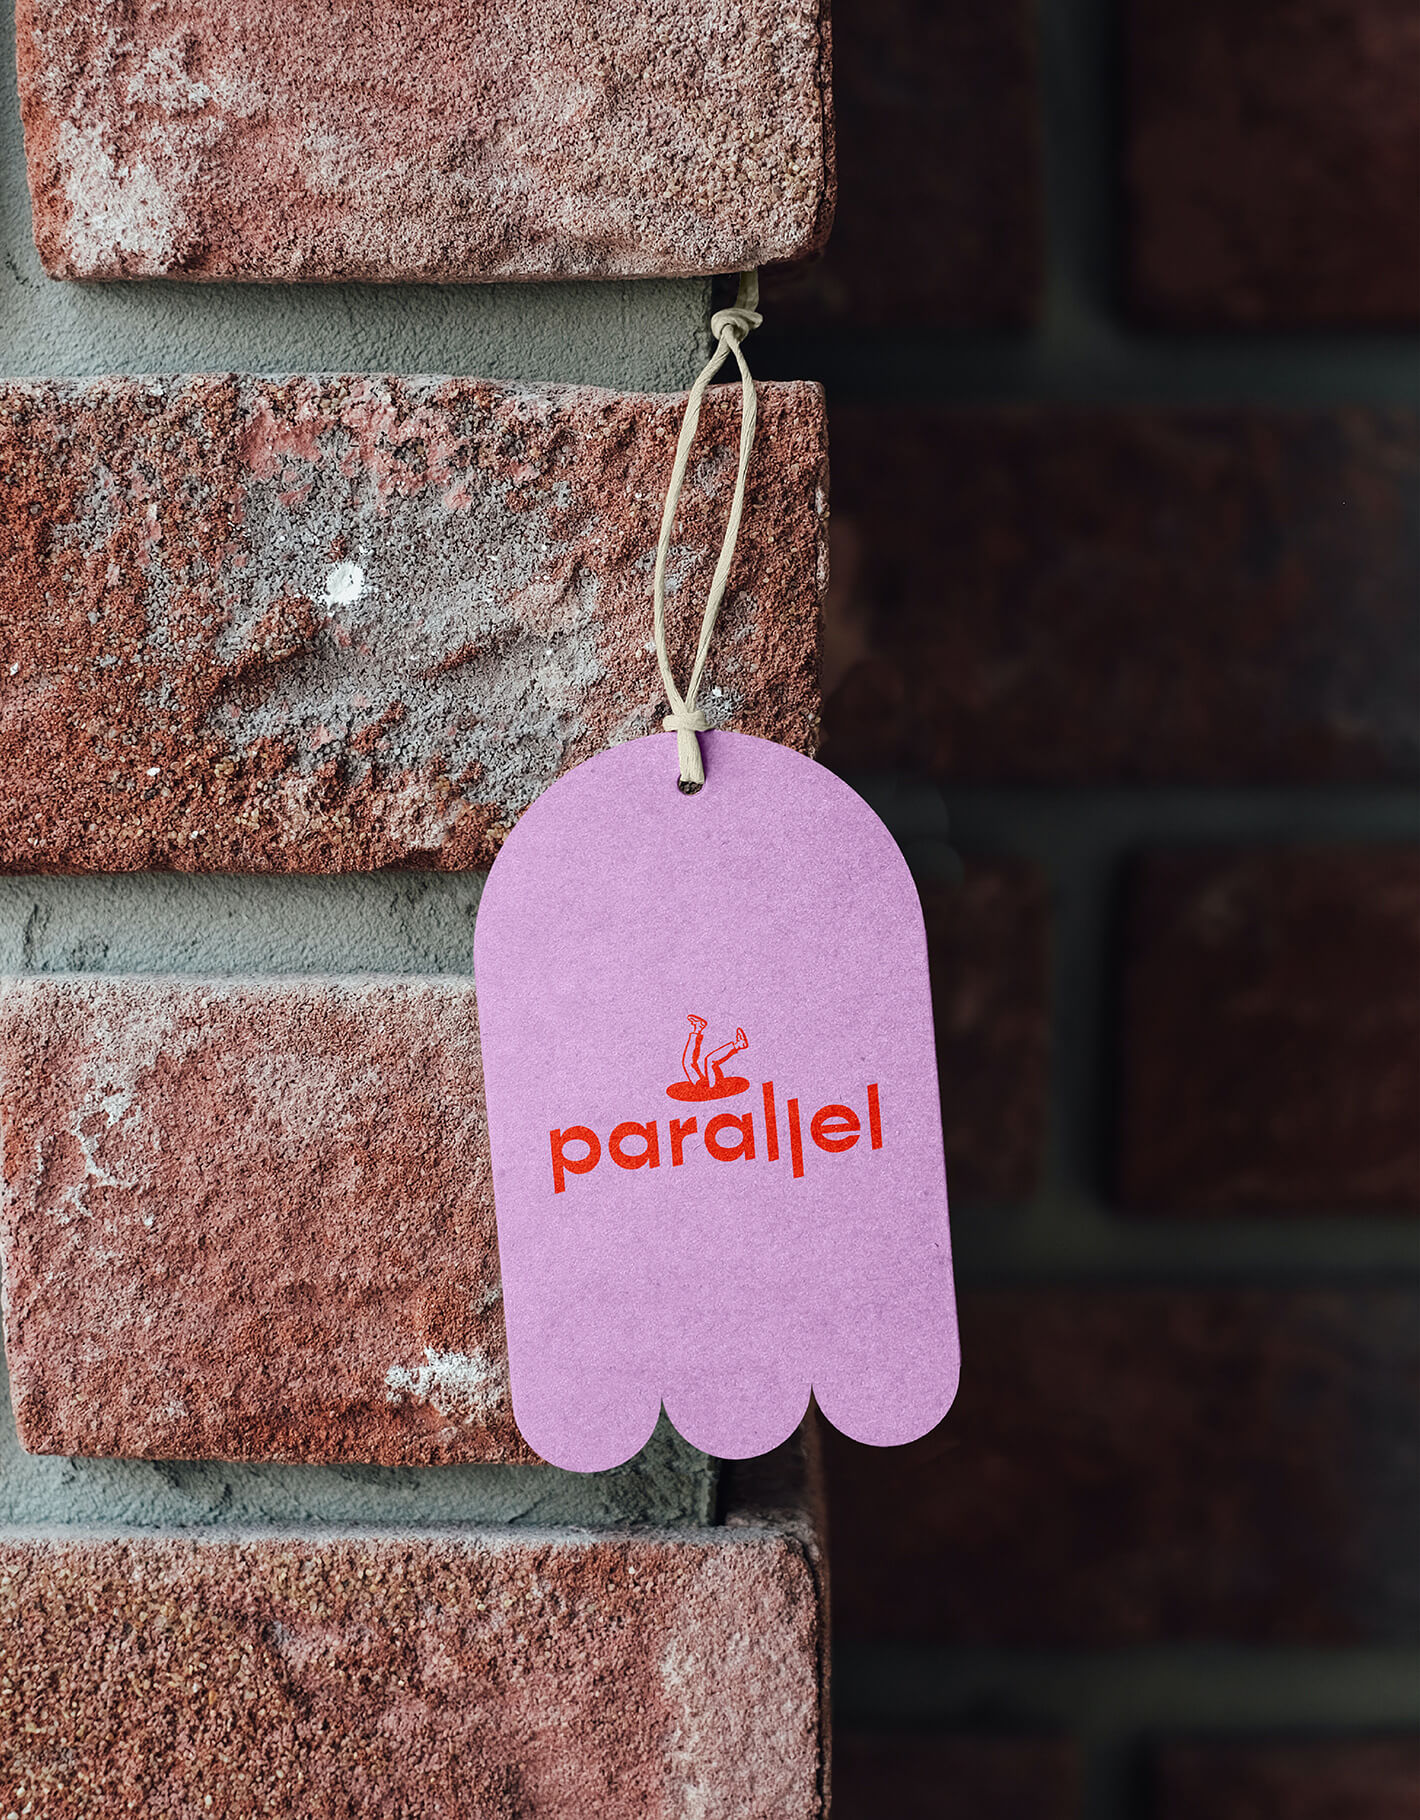 Rebranding case study image of Parallel swing tag on a brick wall. The tag is bright pink with a red logo as well as a custom-dieline in a blobby shape.